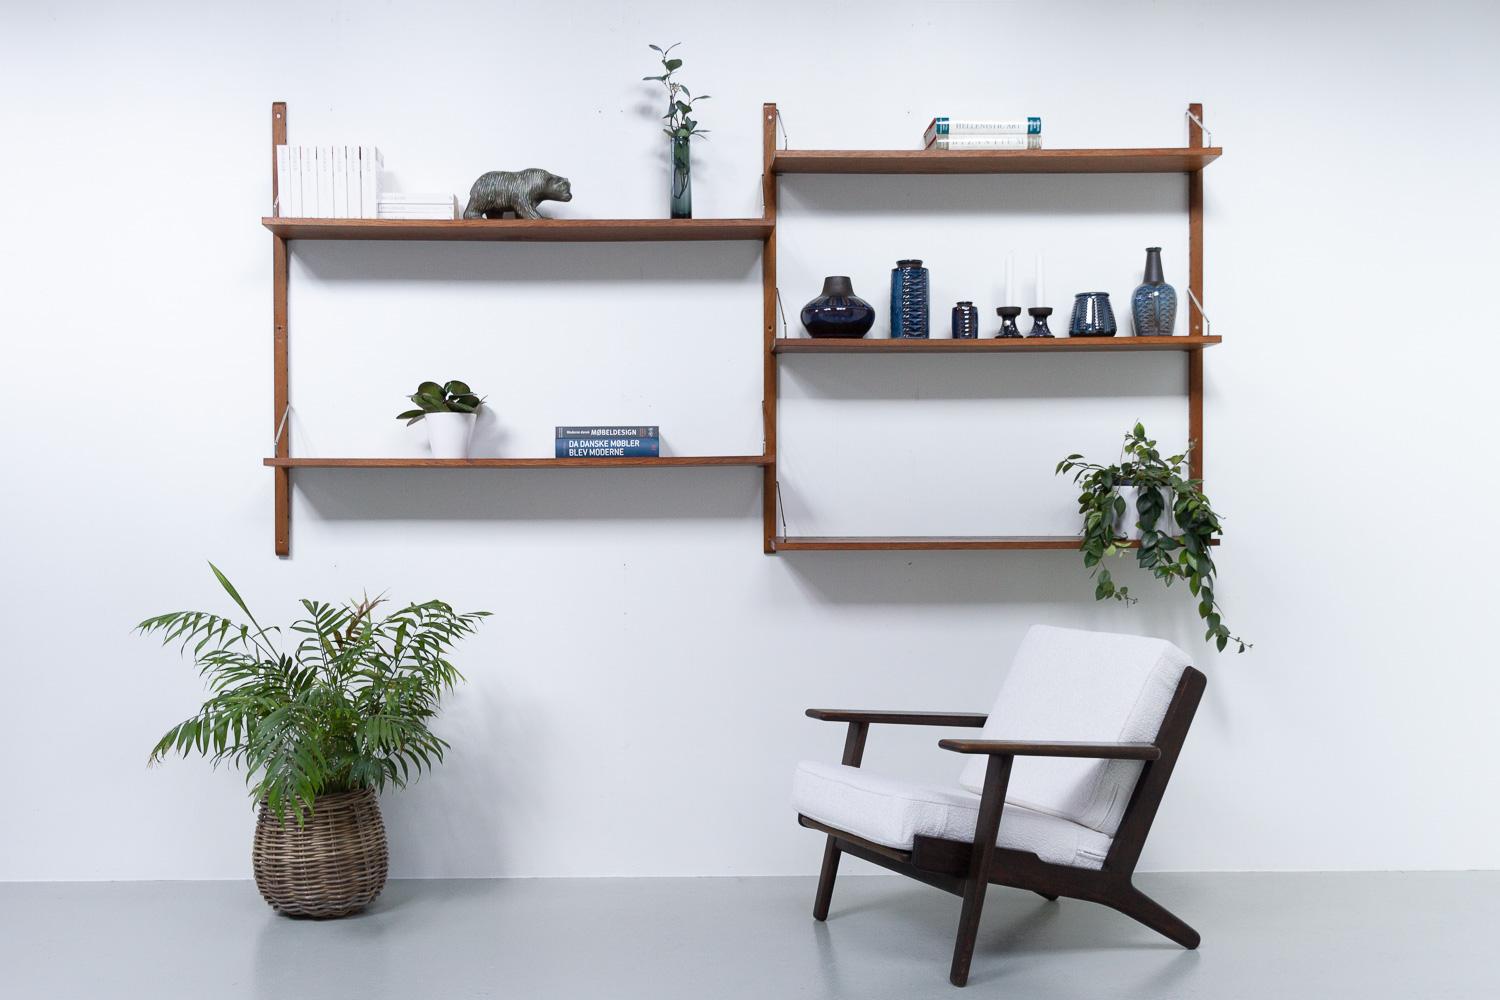 Vintage Danish Oak Shelving System, 1960s.
Wall unit with shelves in oak. The upright and the metal brackets are from the Poul Cadovius System Royal. The long shelves in solid oak are custom made.
This set consists of:
3 uprights in stained beech,